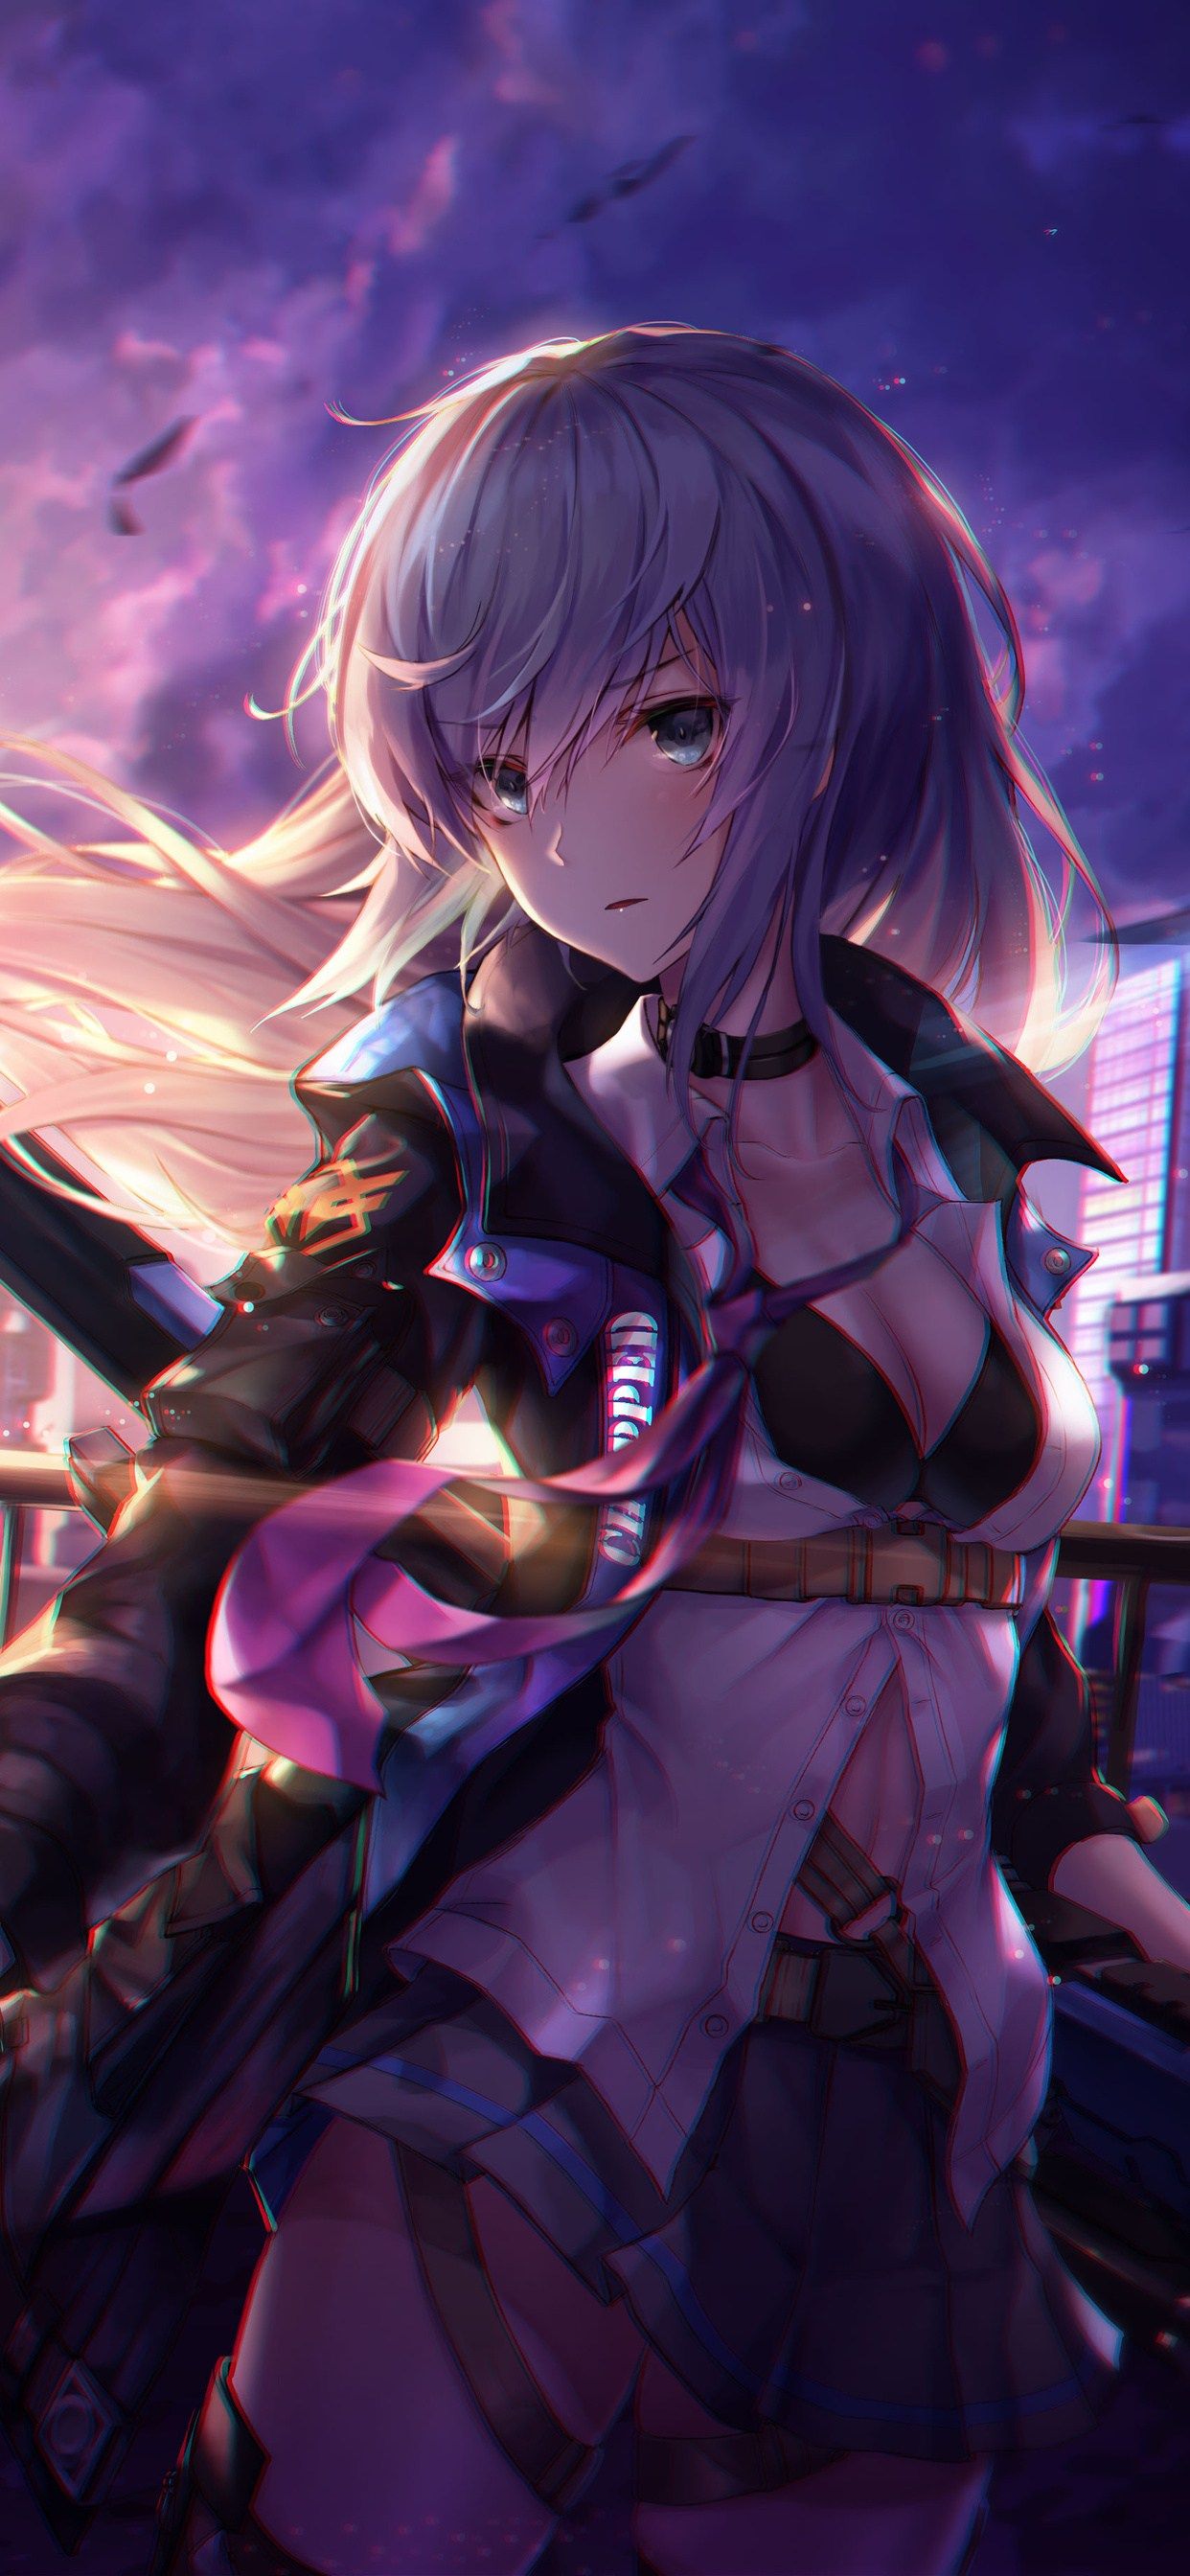 Anime 4k iPhone 13 Pro Max Wallpapers - Wallpaper Cave